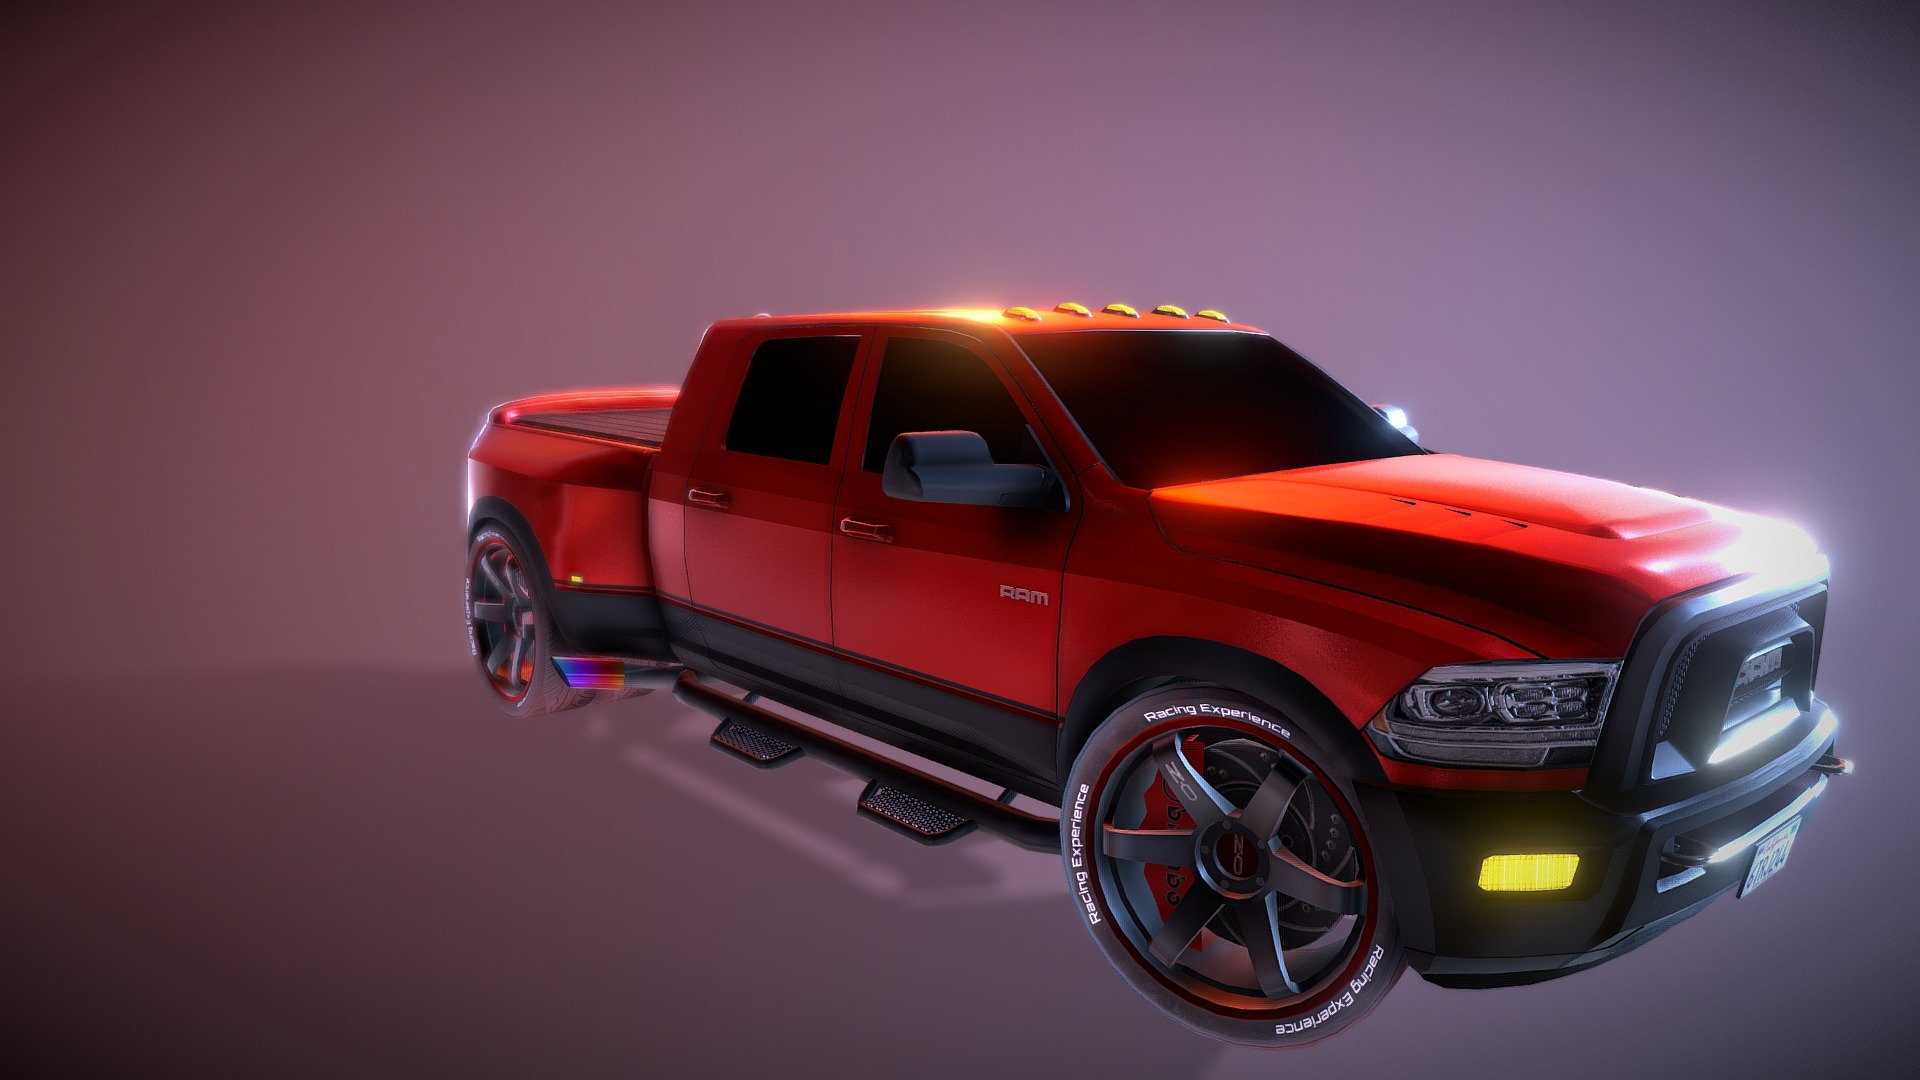 i recently Modelled this low poly Dodge ram for upcoming game in maya and textured in substance painter 3d model